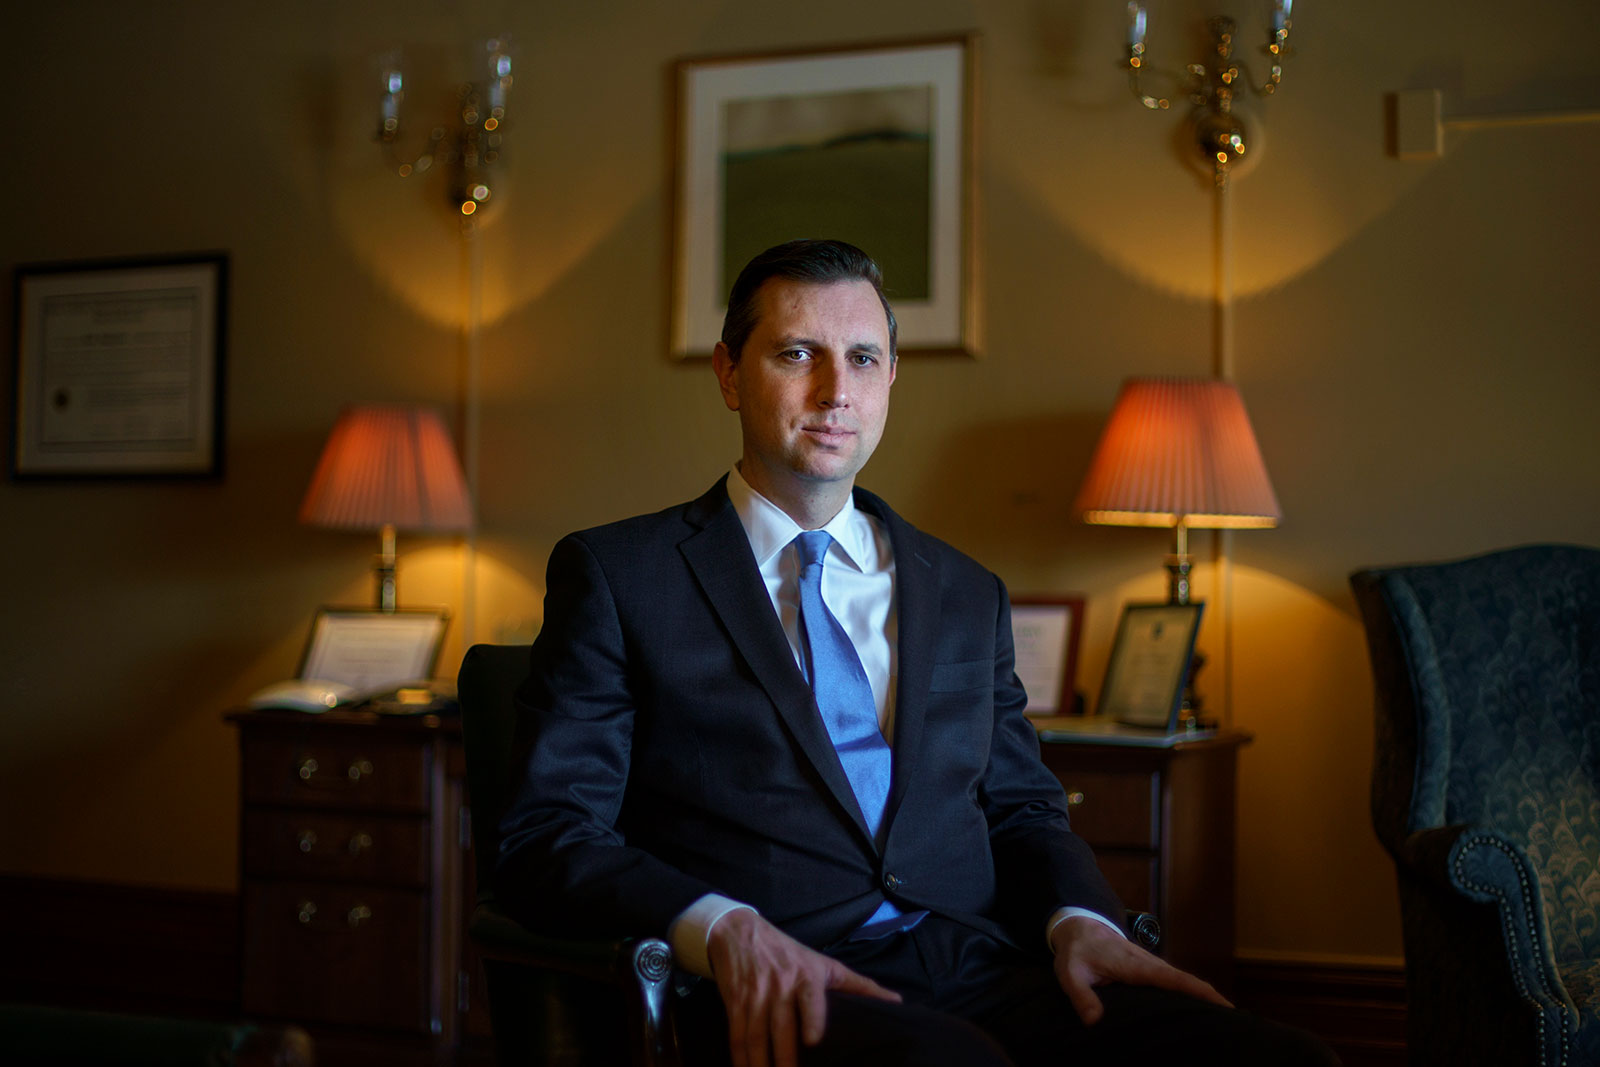 Seth Magaziner is photographed in his office in Providence, Rhode Island on February 7. 